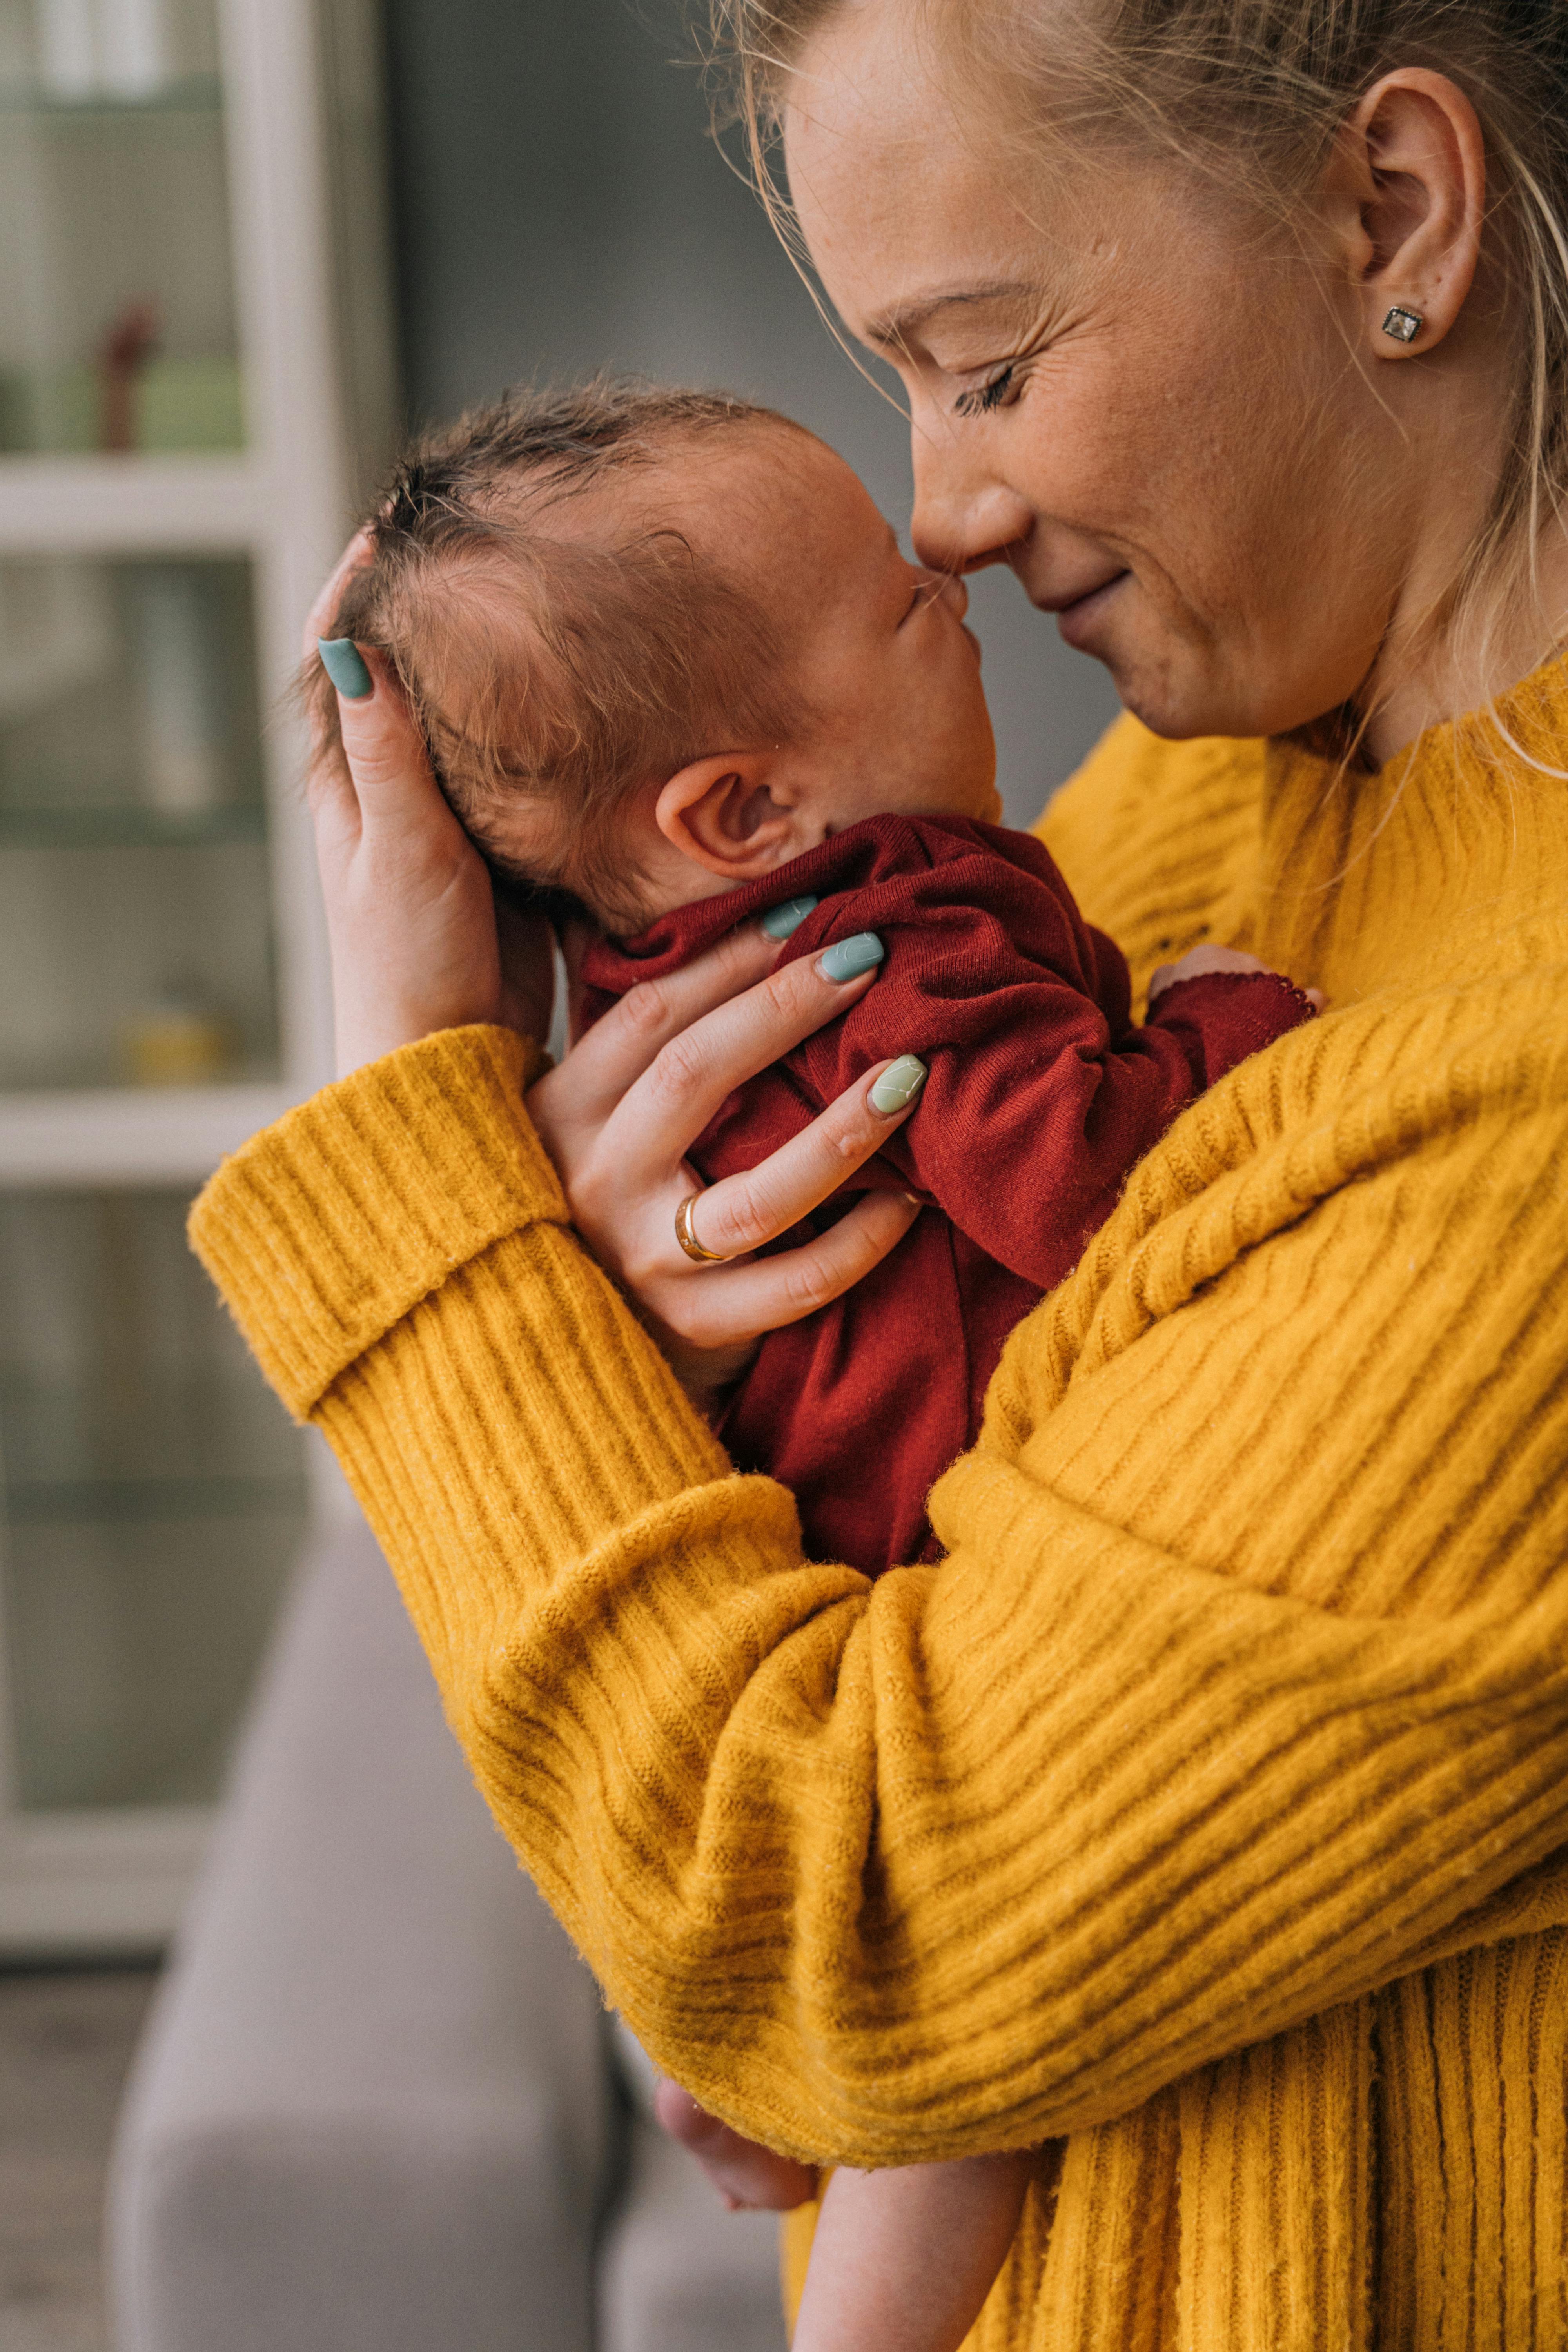 woman in yellow sweater kissing an infant in red sweater